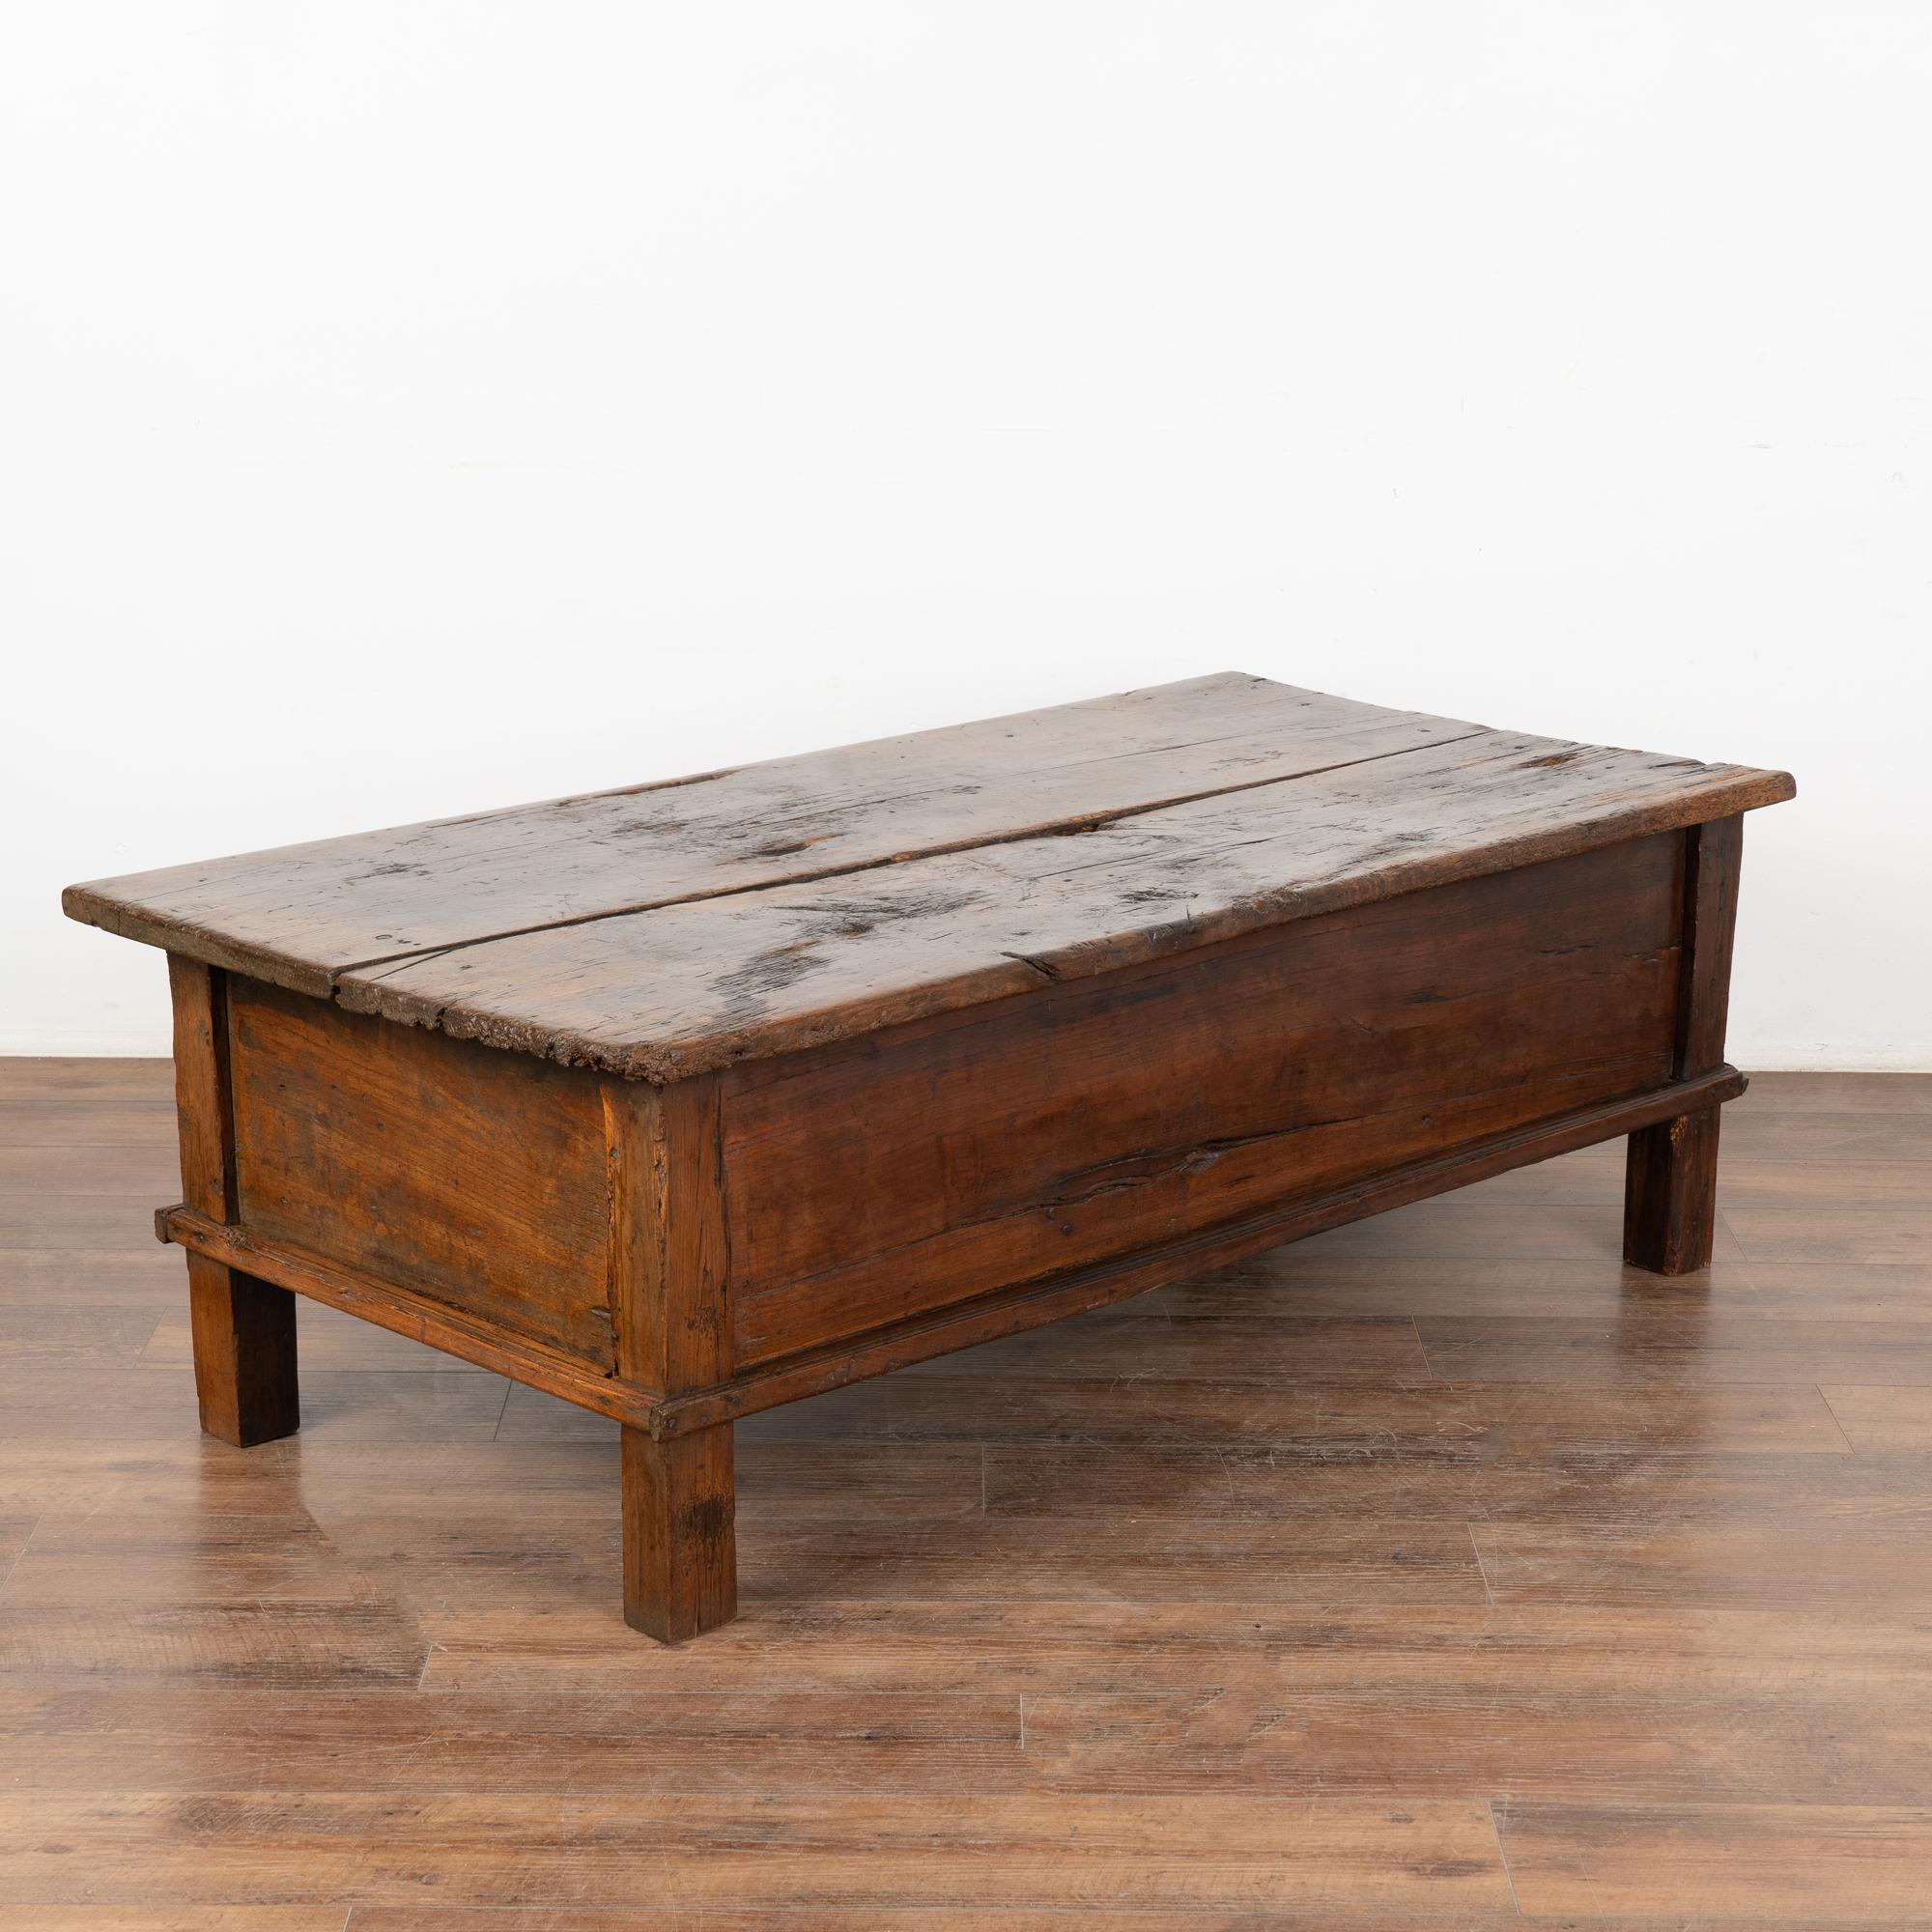 French Country Coffee Table with One Drawer, circa 1820-40 6